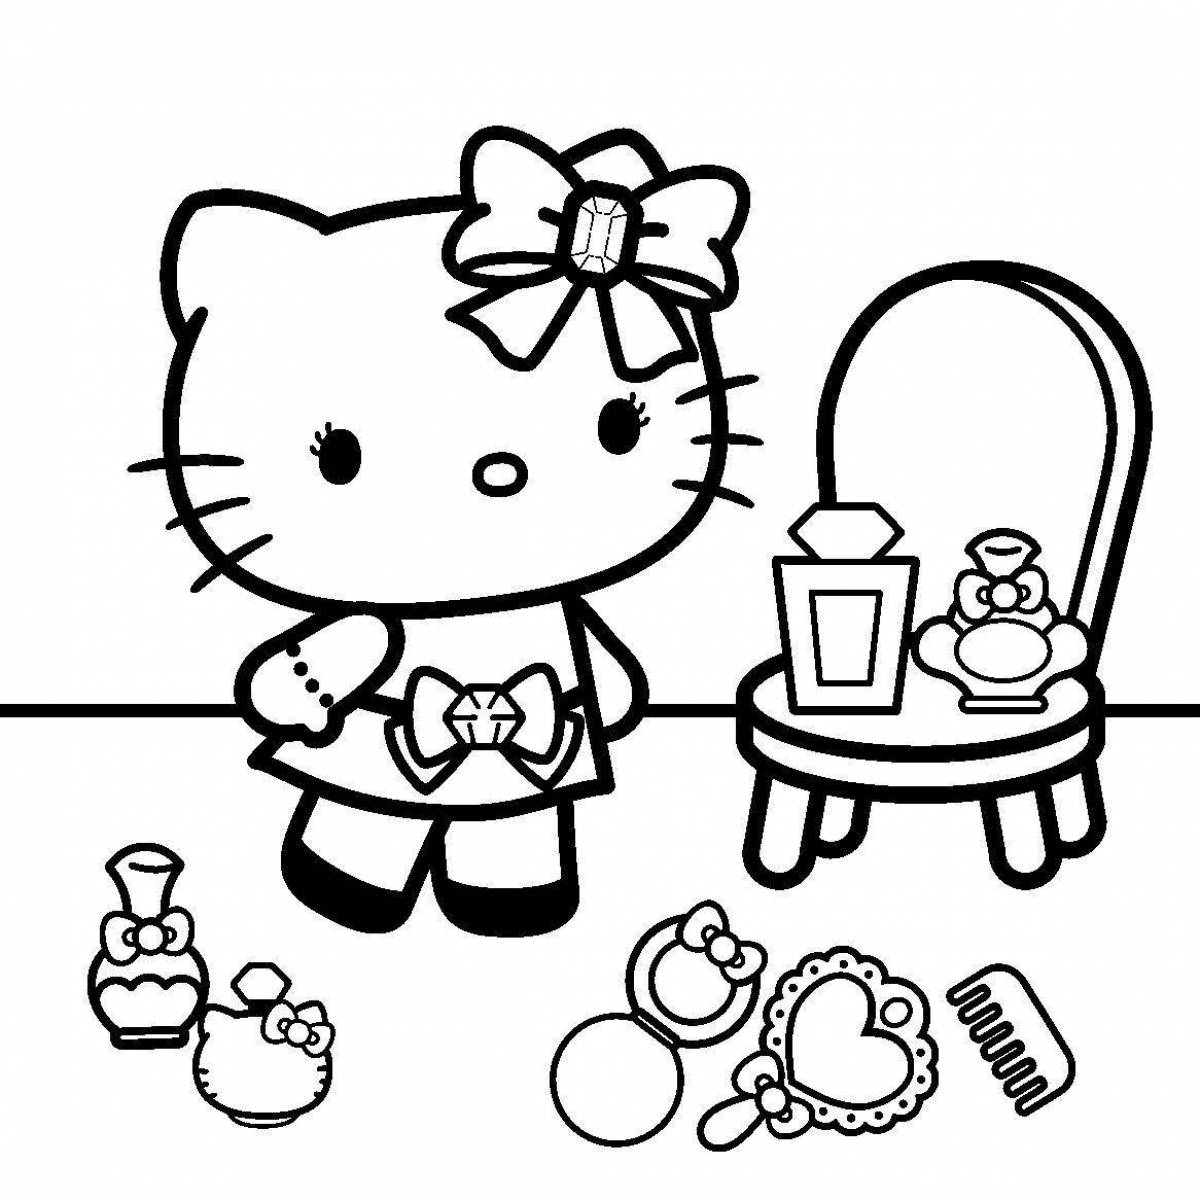 Playful hello kitty with a gun